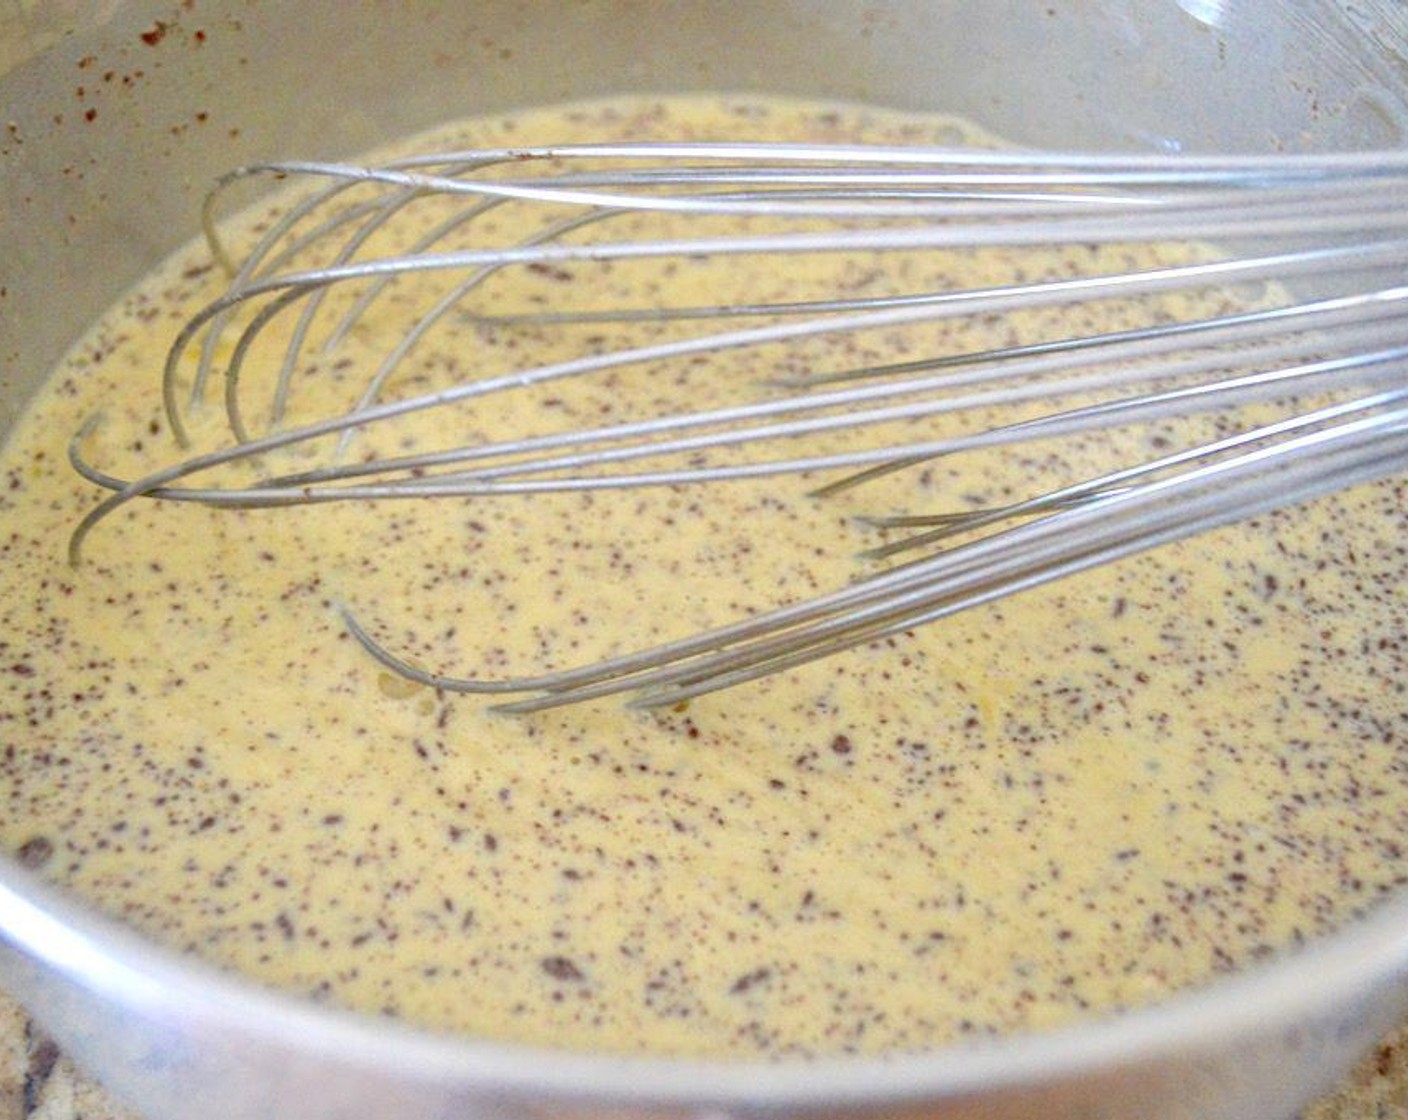 step 3 In a medium bowl, whisk the Eggs (6), Heavy Cream (1 cup), Ground Cinnamon (1 tsp), Ground Ginger (1 tsp), and Vanilla Extract (1/2 tsp) together until smooth.